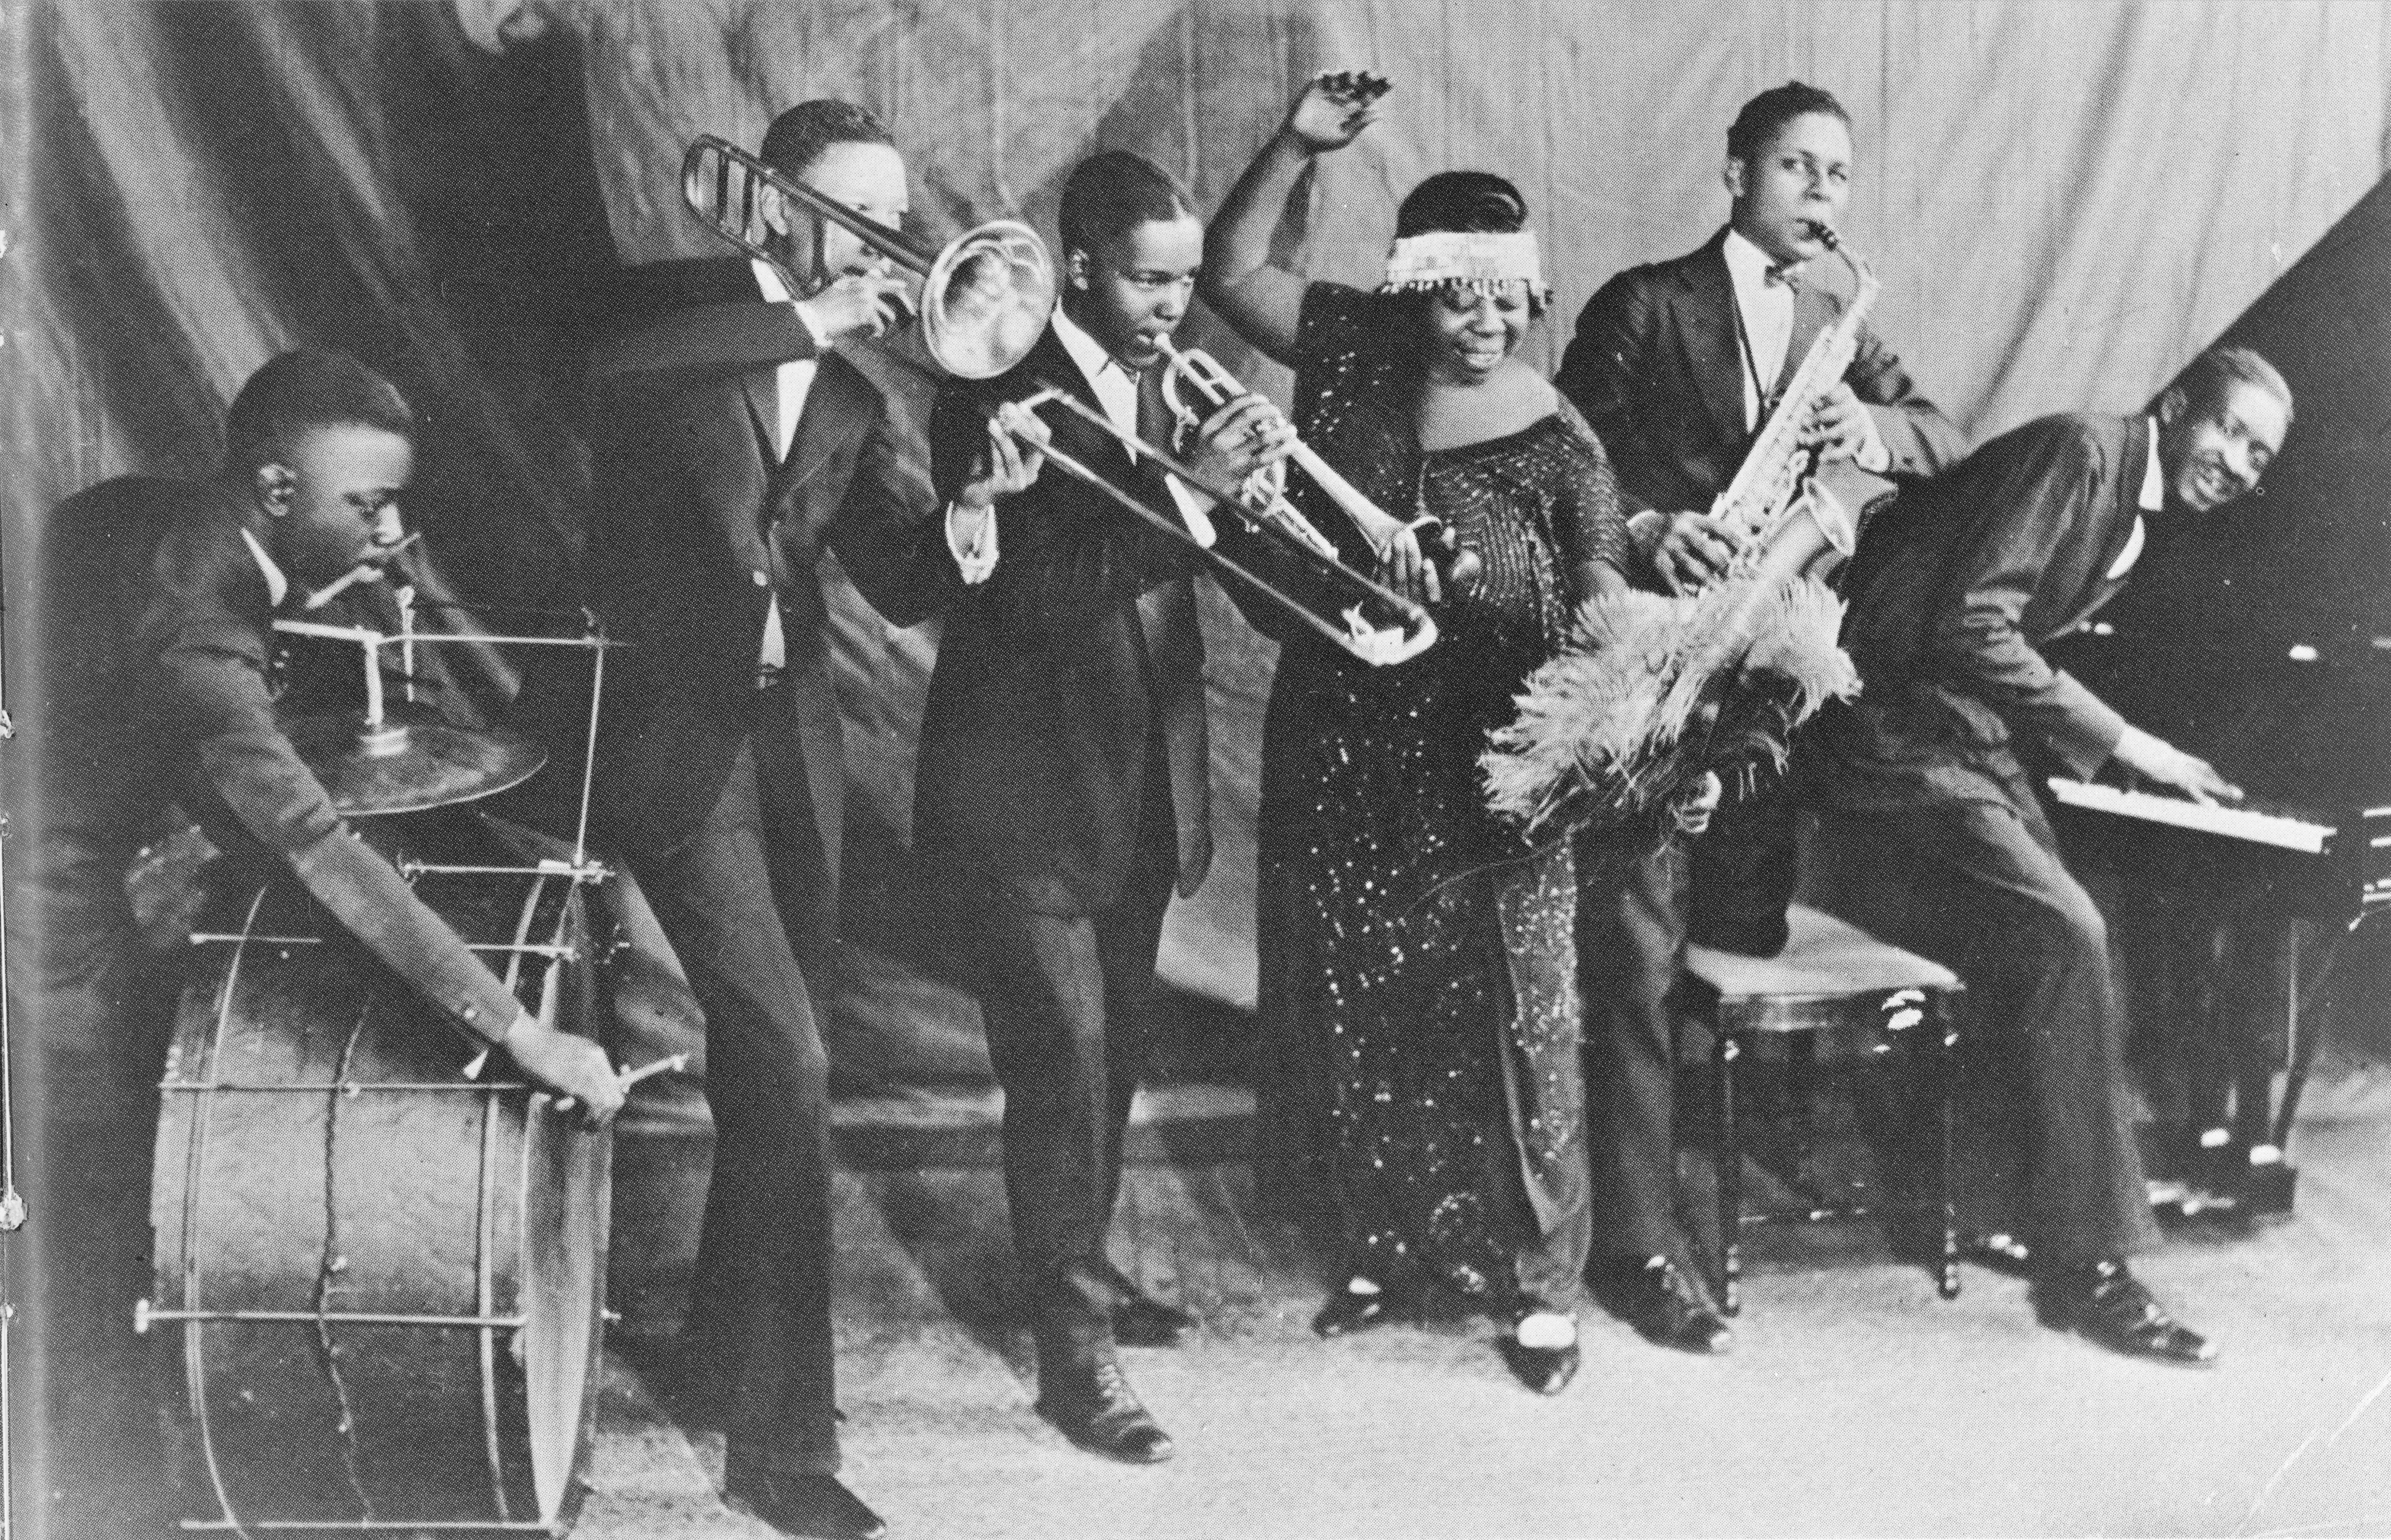 Ma Rainey and her band the Rabbit Foot Minstrels circa 1924 in Chicago, Illinois. (Photo by Michael Ochs Archives/Getty Images)